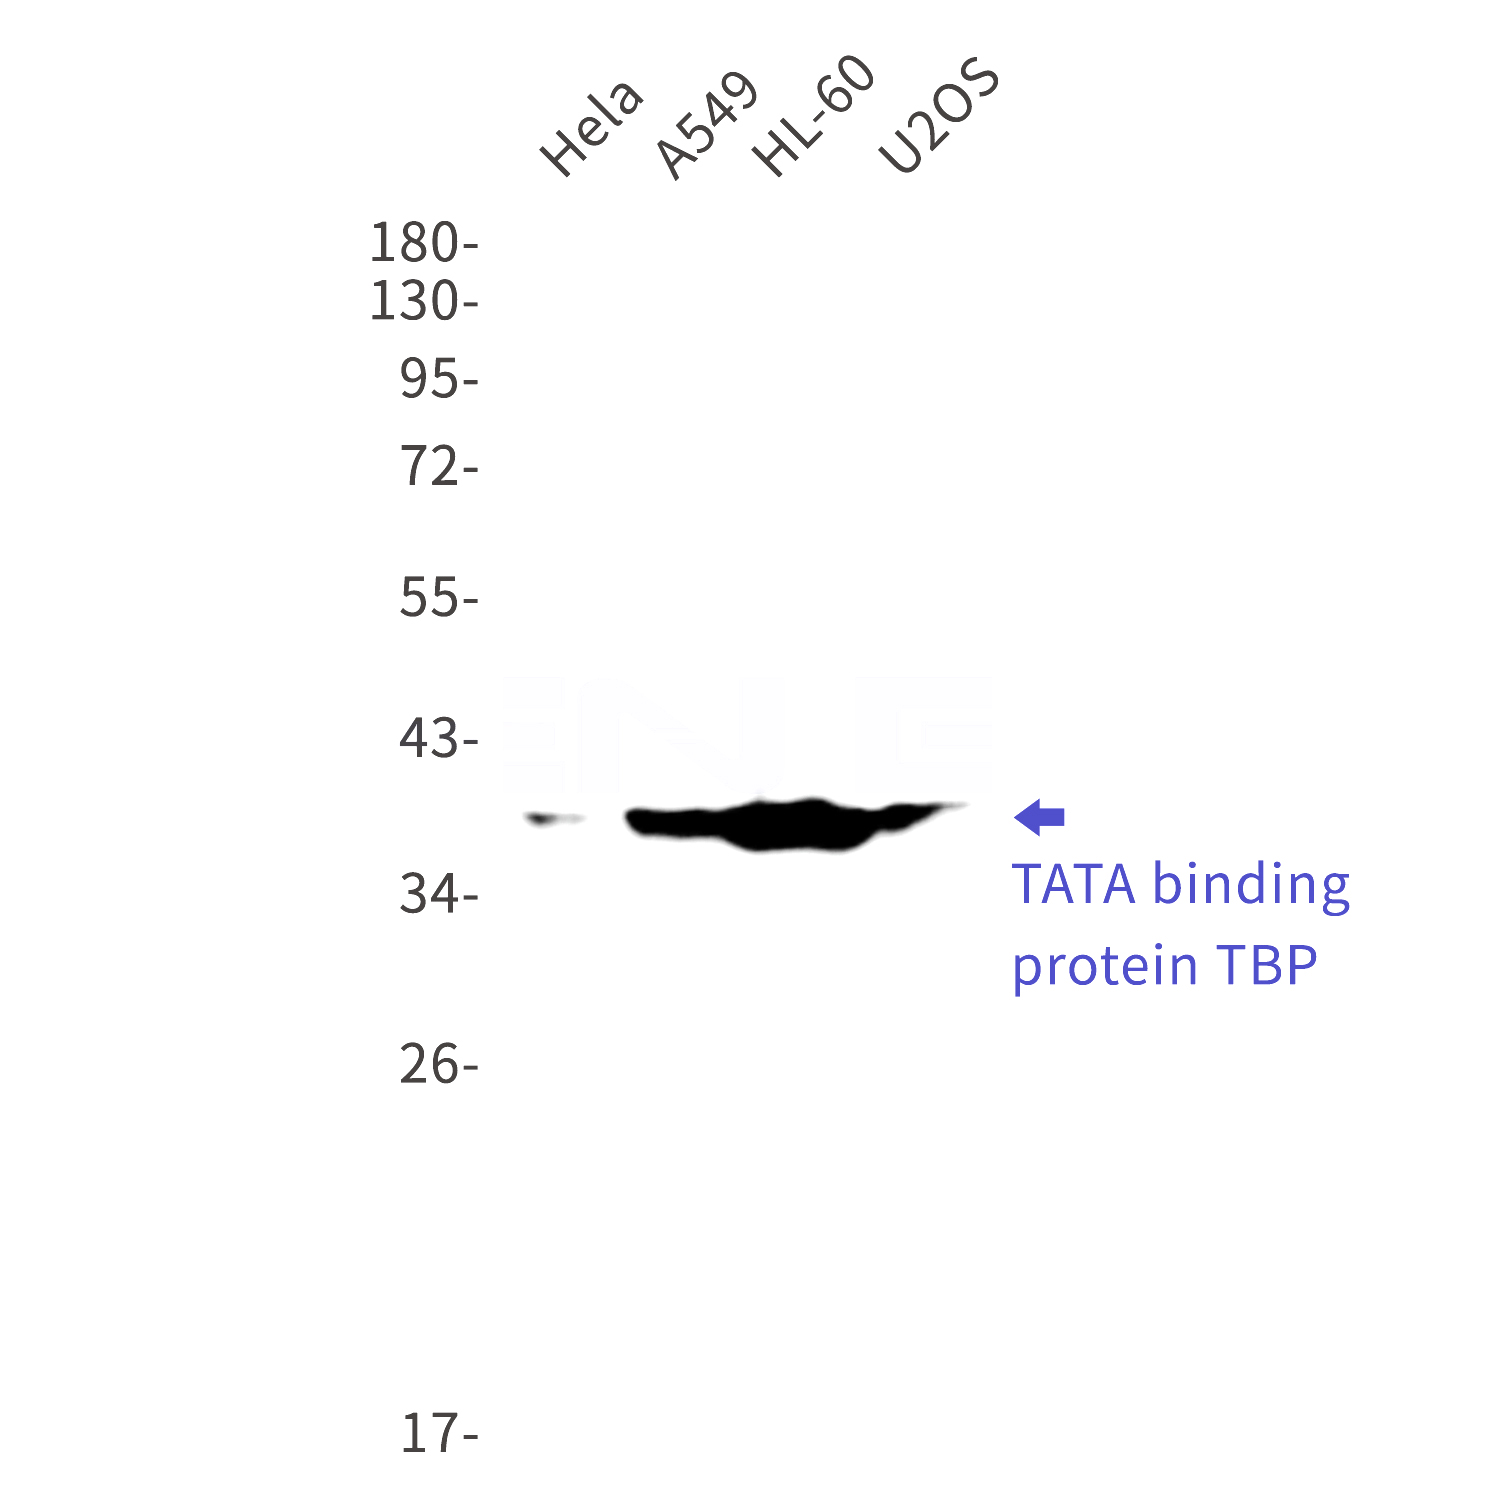 Western blot detection of TATA binding protein TBP in Hela,A549,HL-60,U2OS cell lysates using TATA binding protein TBP Rabbit mAb(1:1000 diluted).Predicted band size:38kDa.Observed band size:38kDa.